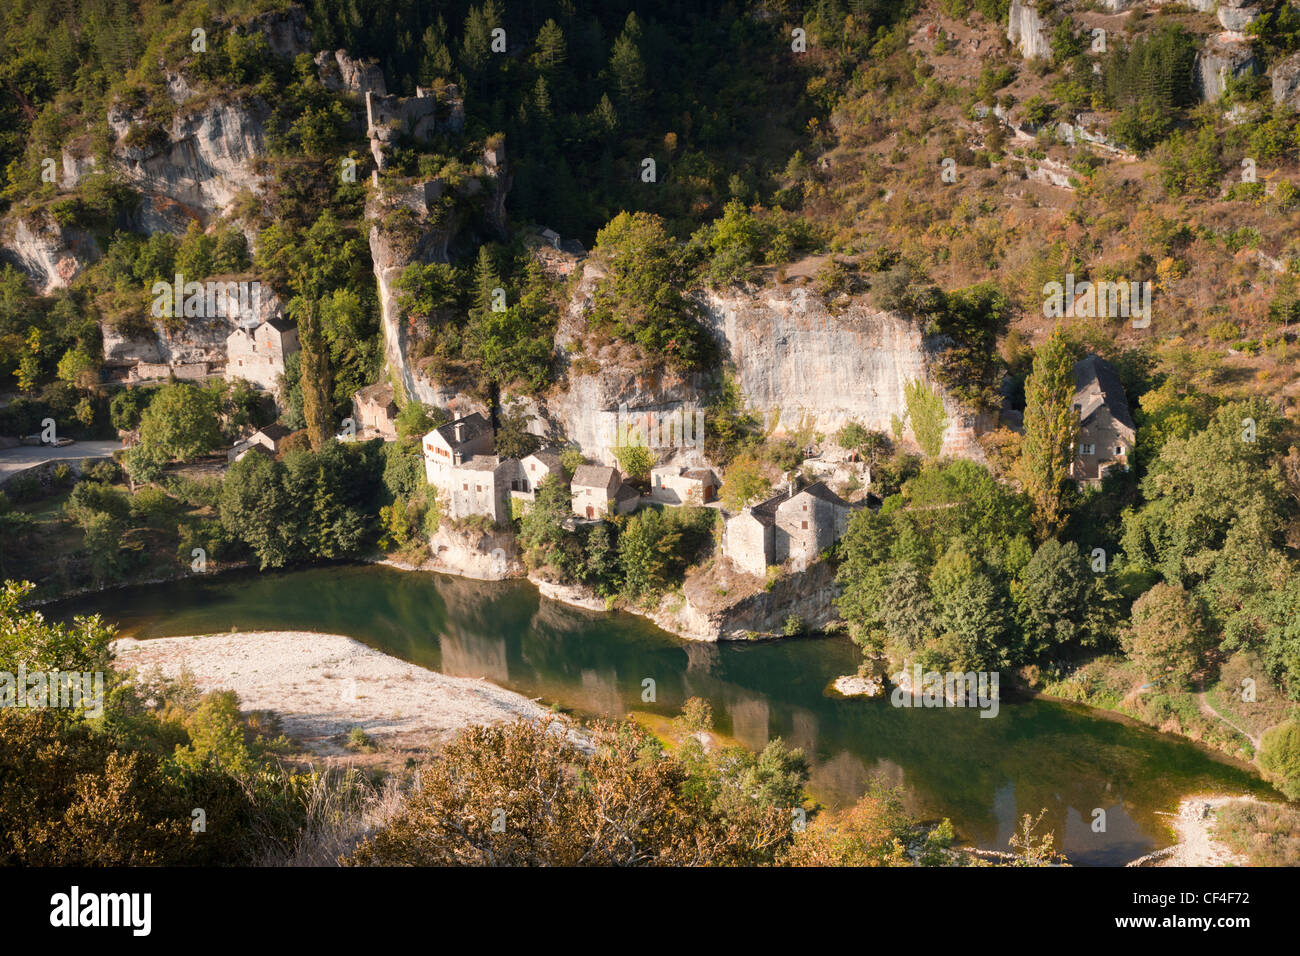 The tiny abandoned village of Castelbouc and its chateau in the Tarn Gorge, Languedoc-Roussillon. Stock Photo